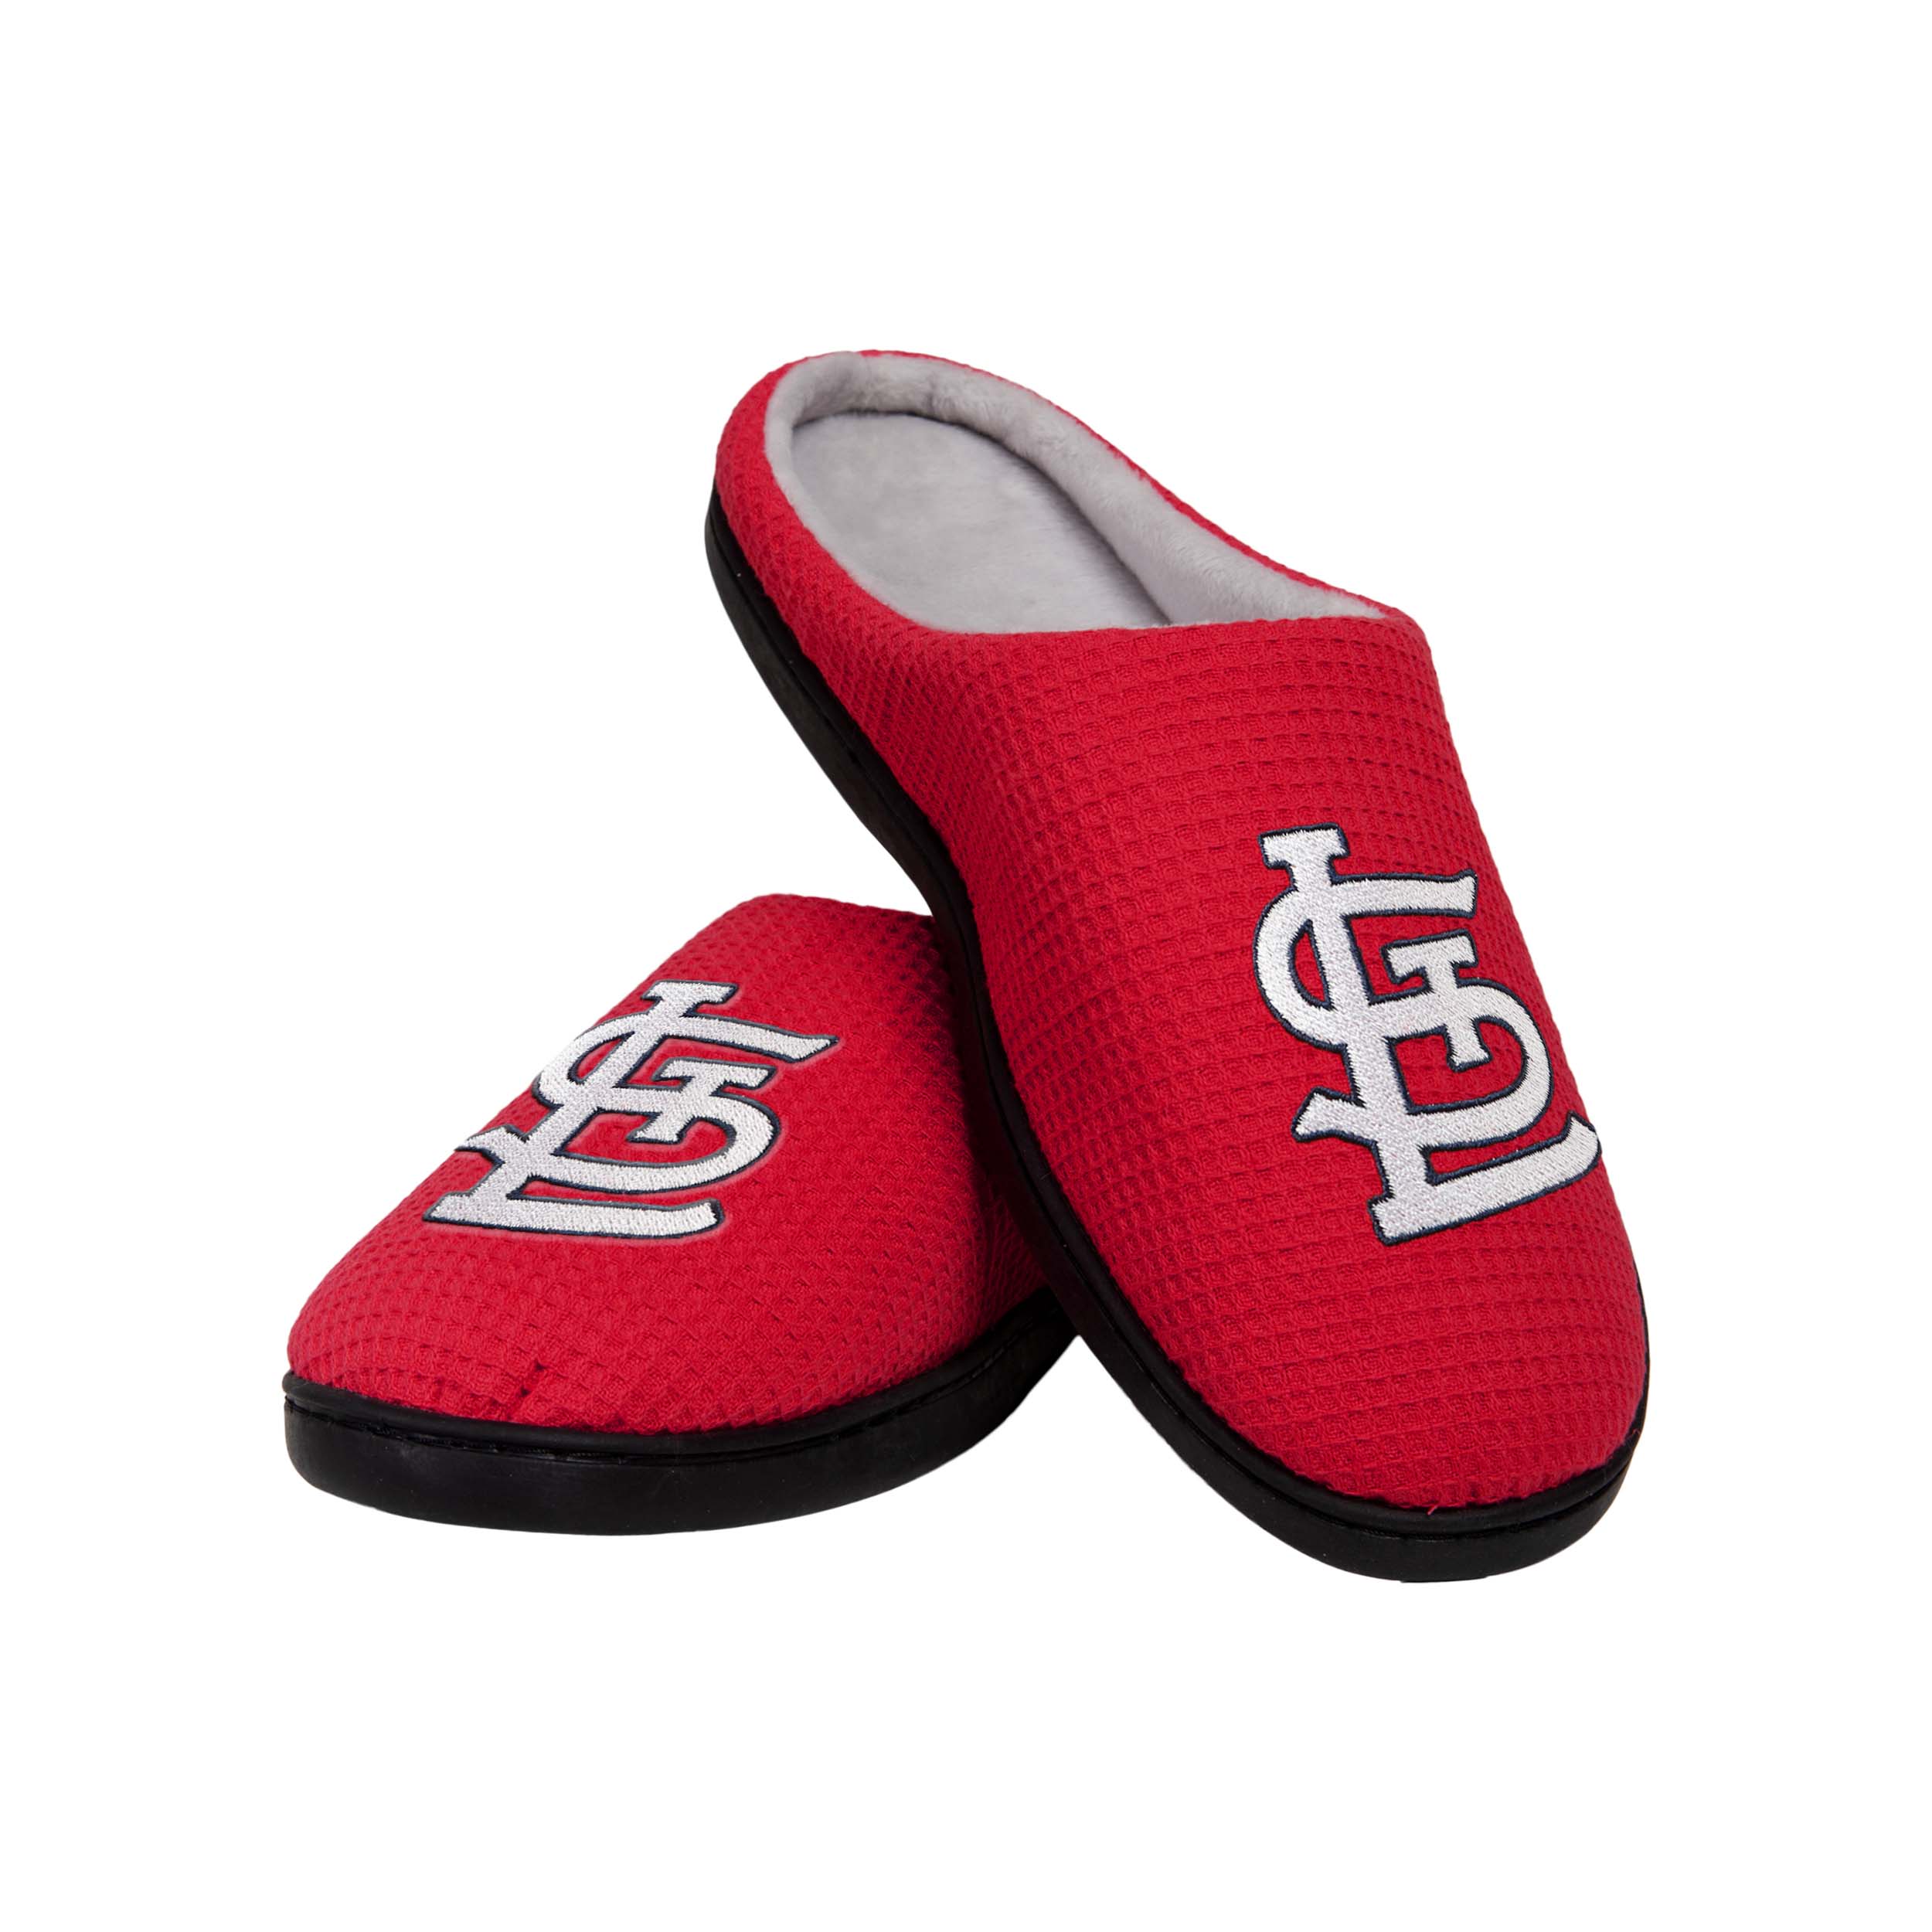 st louis cardinals slippers